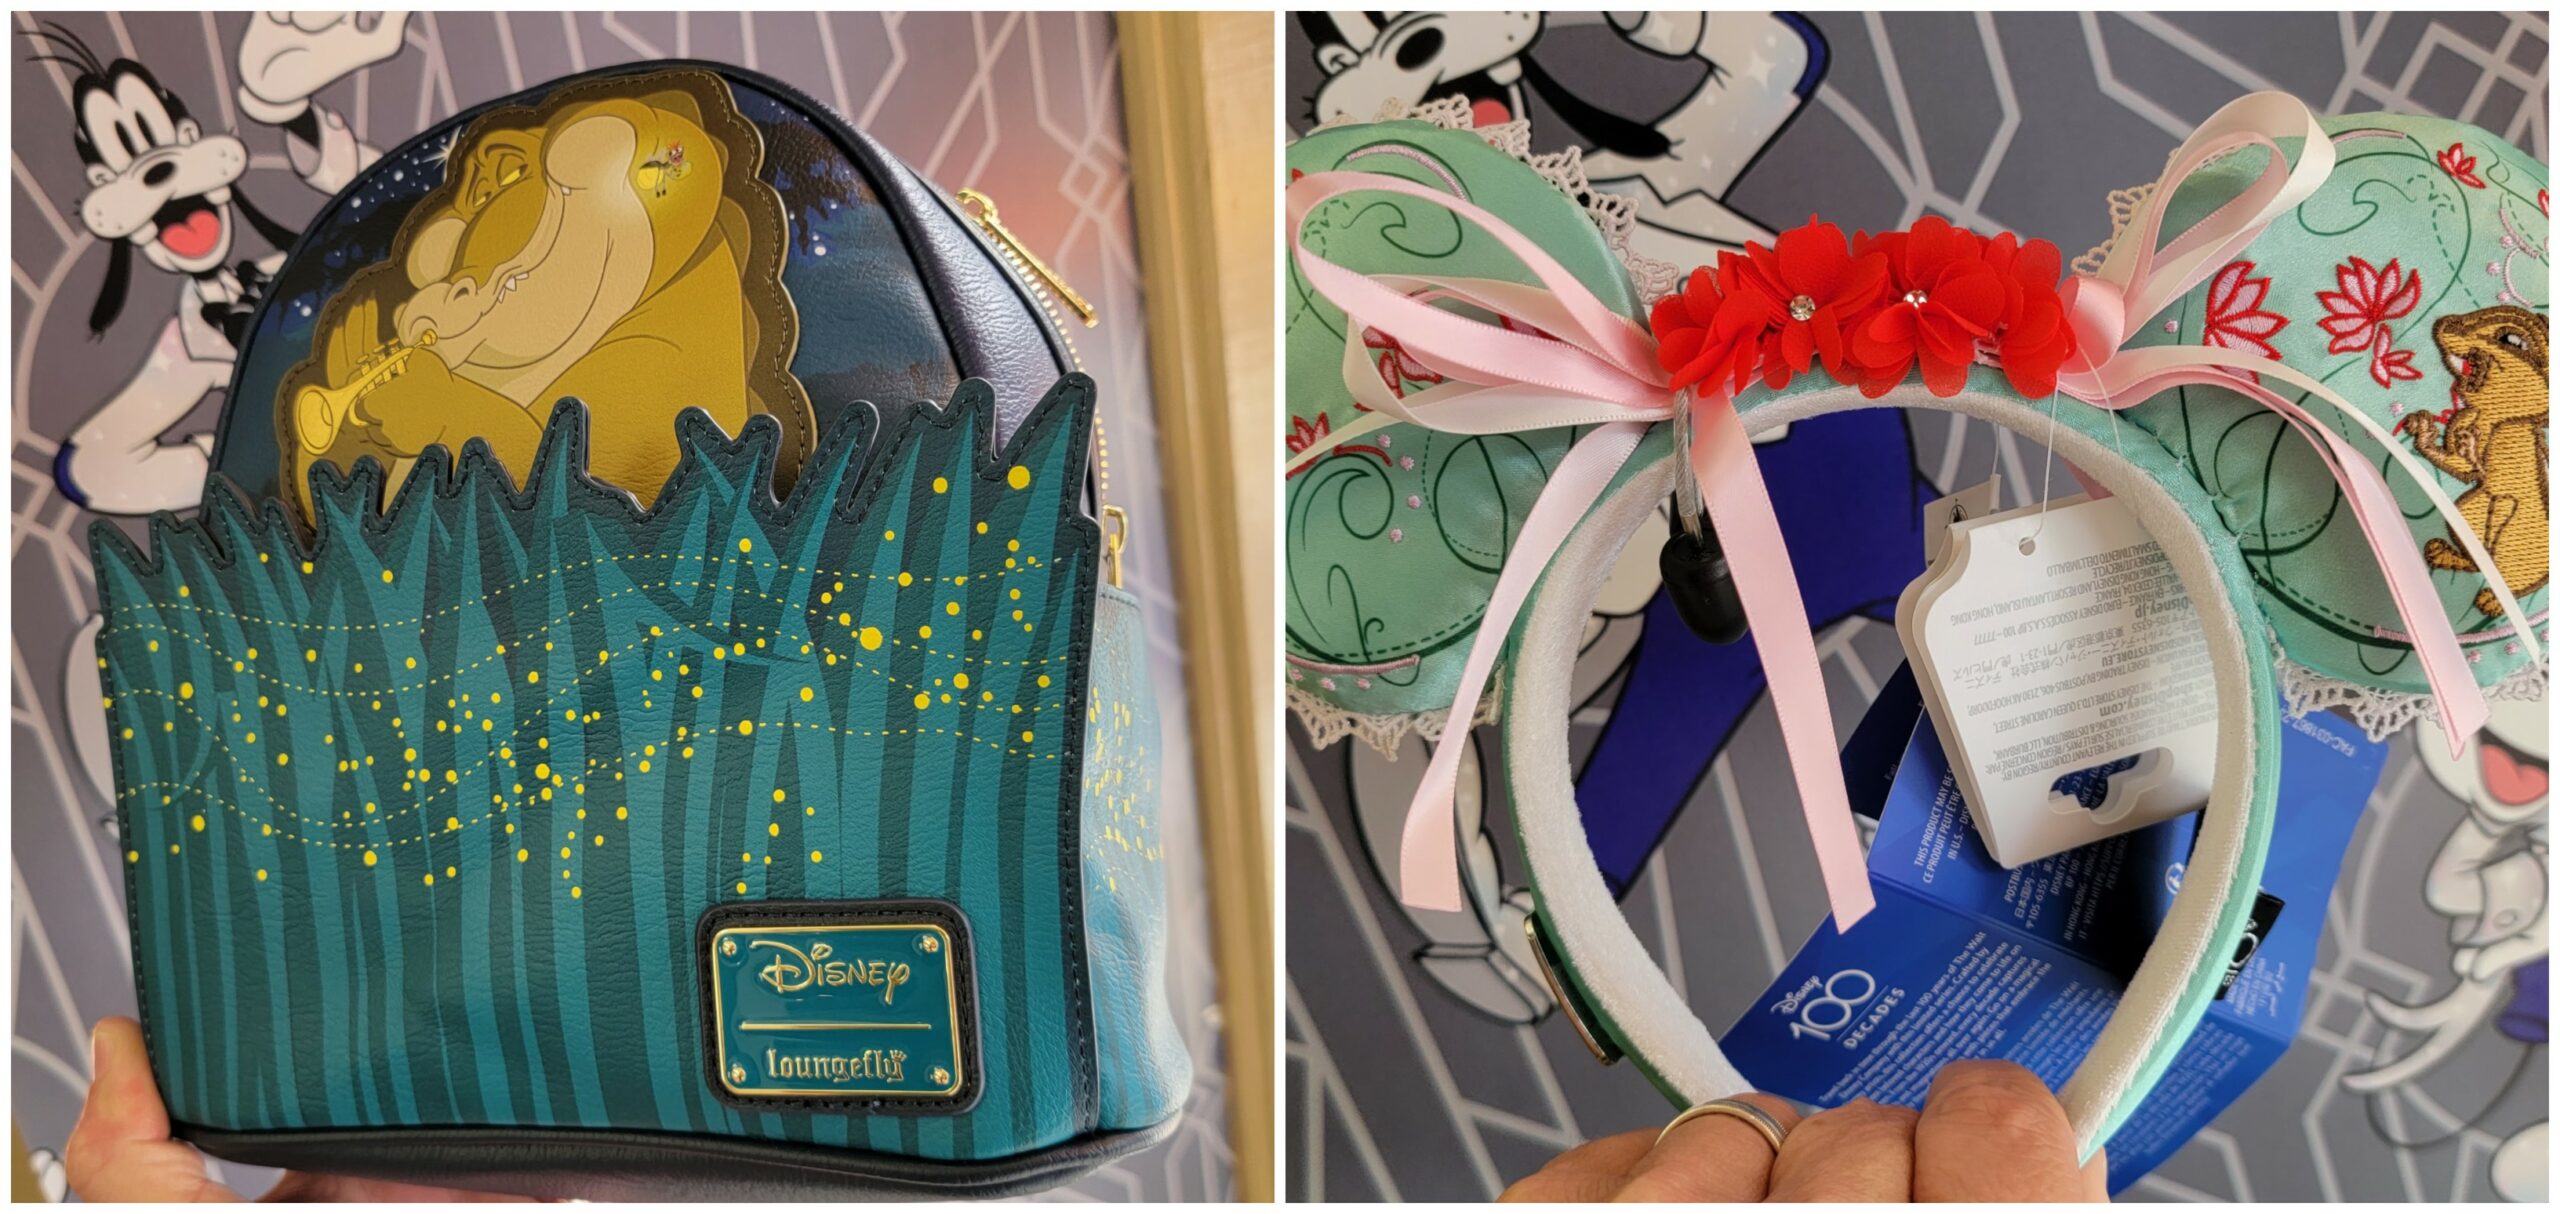 New Disney100 Decades 2000s Collection Now Available at Disney World